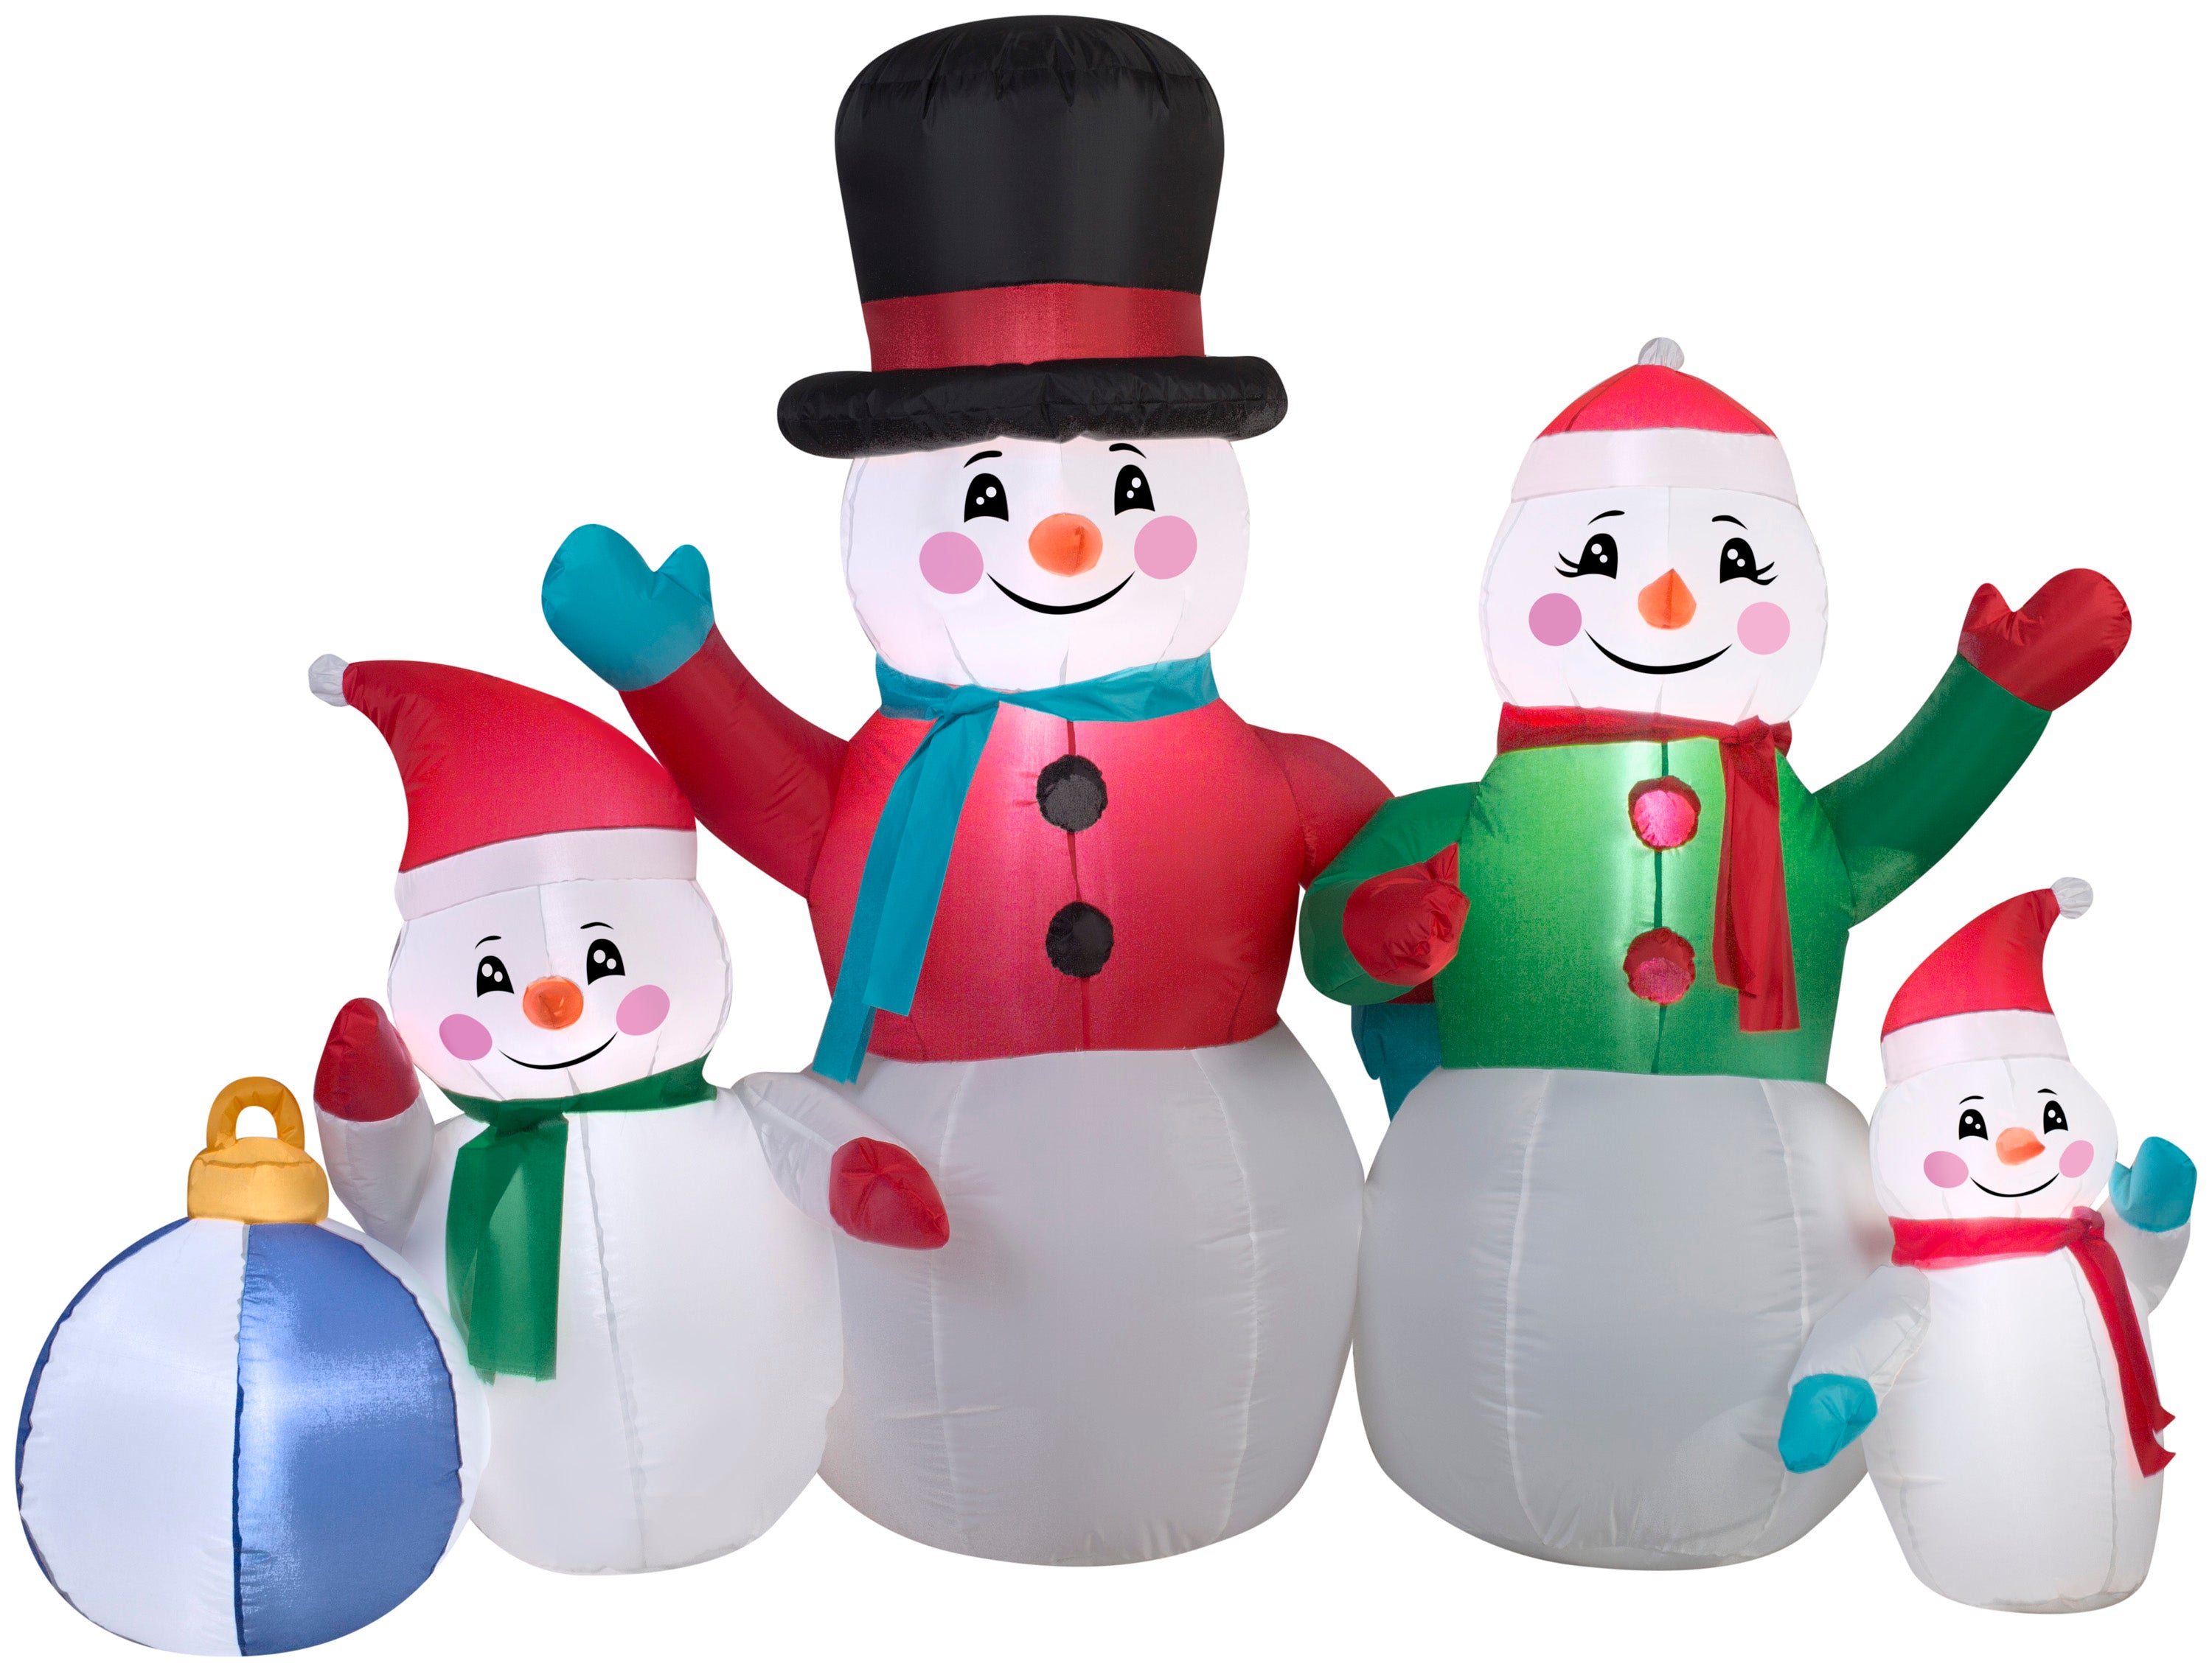 6.5' Wide Airblown Snowman Family Collection Christmas Inflatable